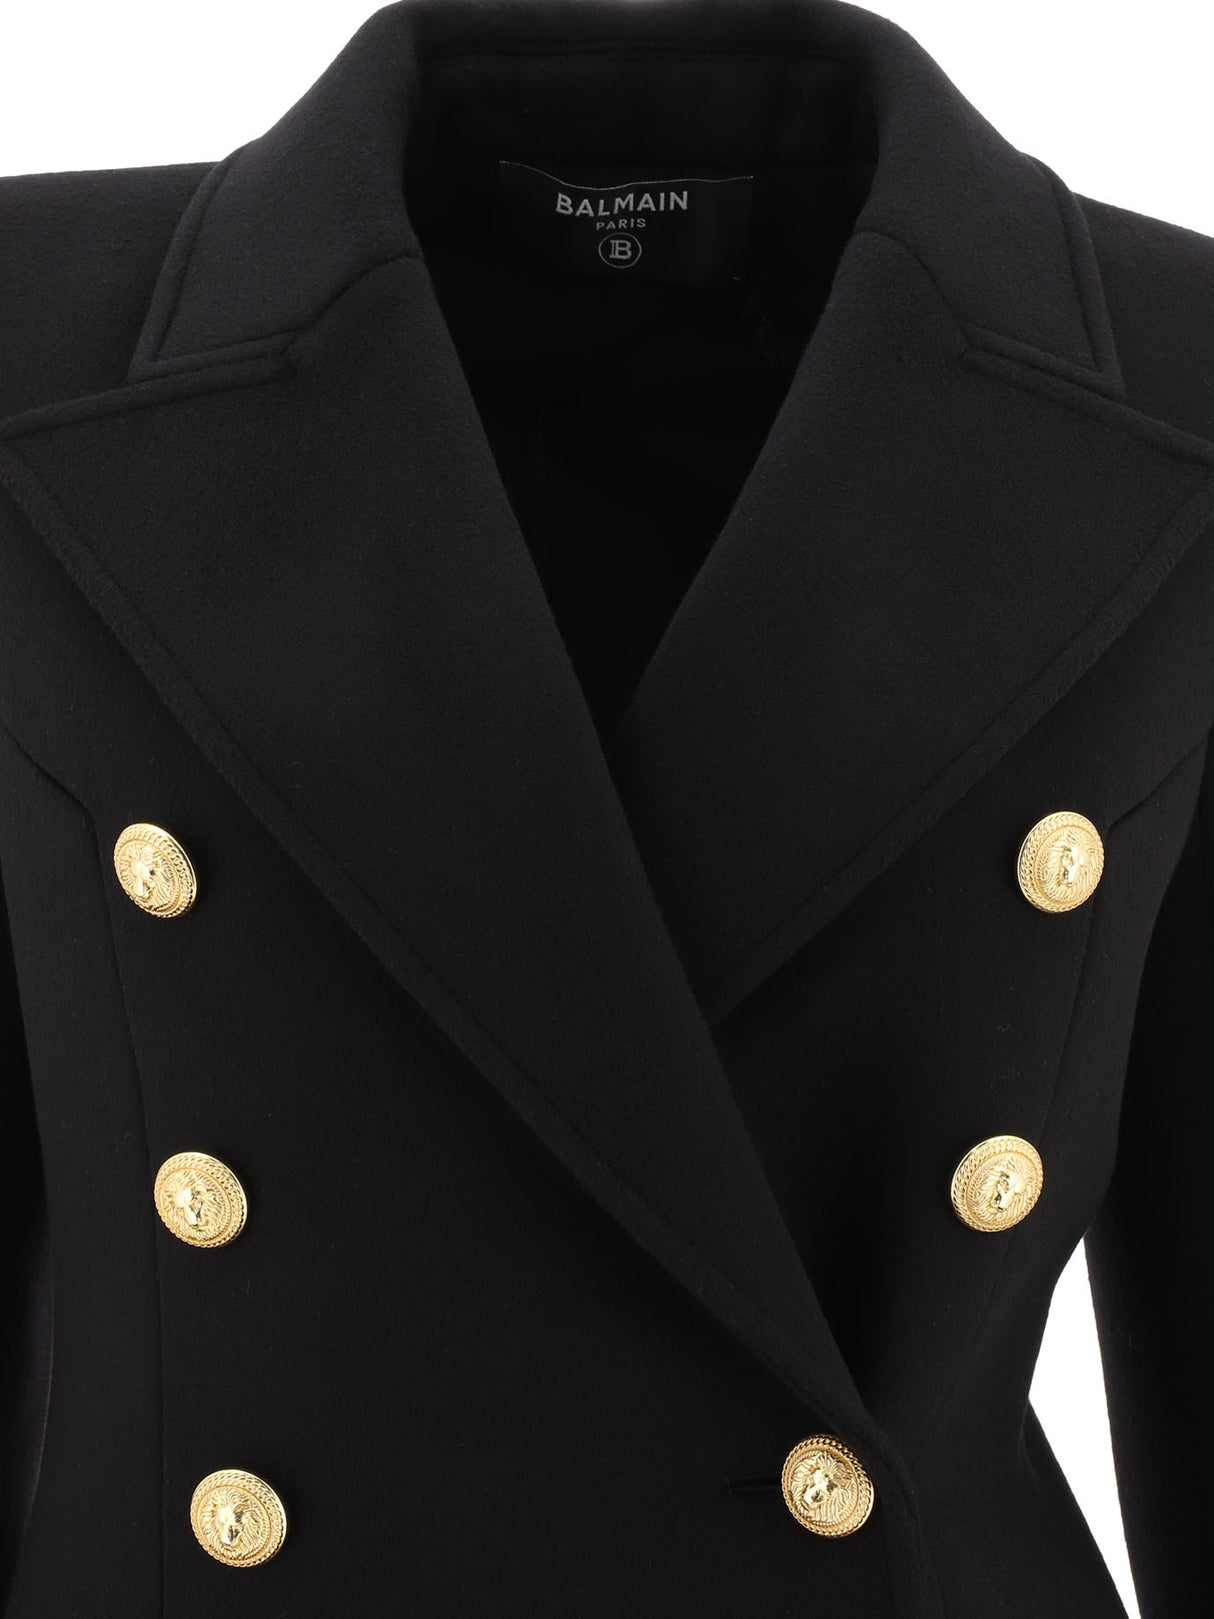 BALMAIN DOUBLE-BREASTED Jacket WITH GOLD BUTTONS